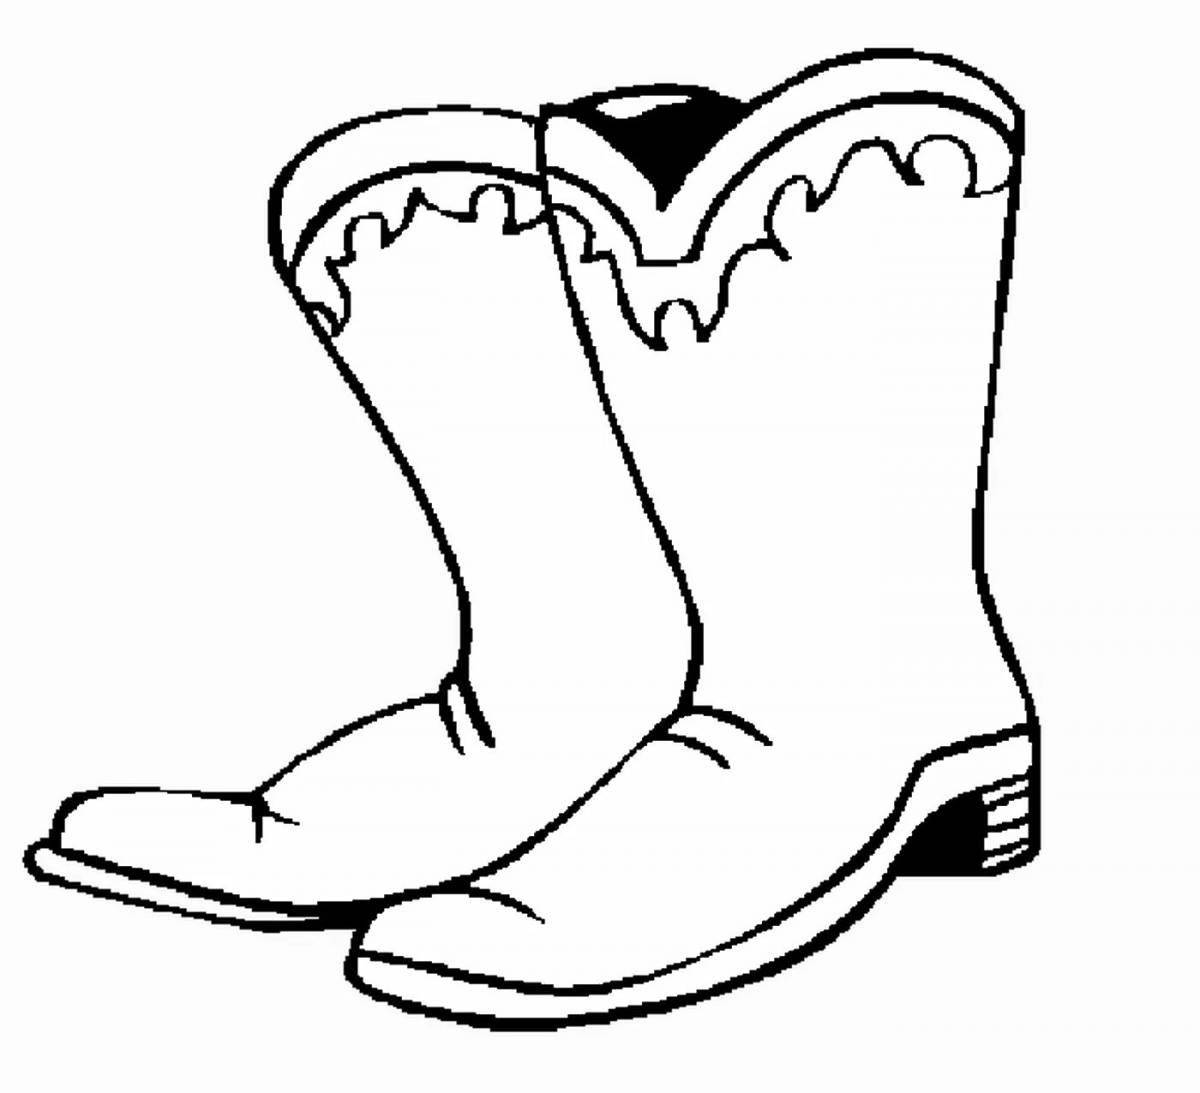 Amazing shoe coloring page for 4-5 year olds